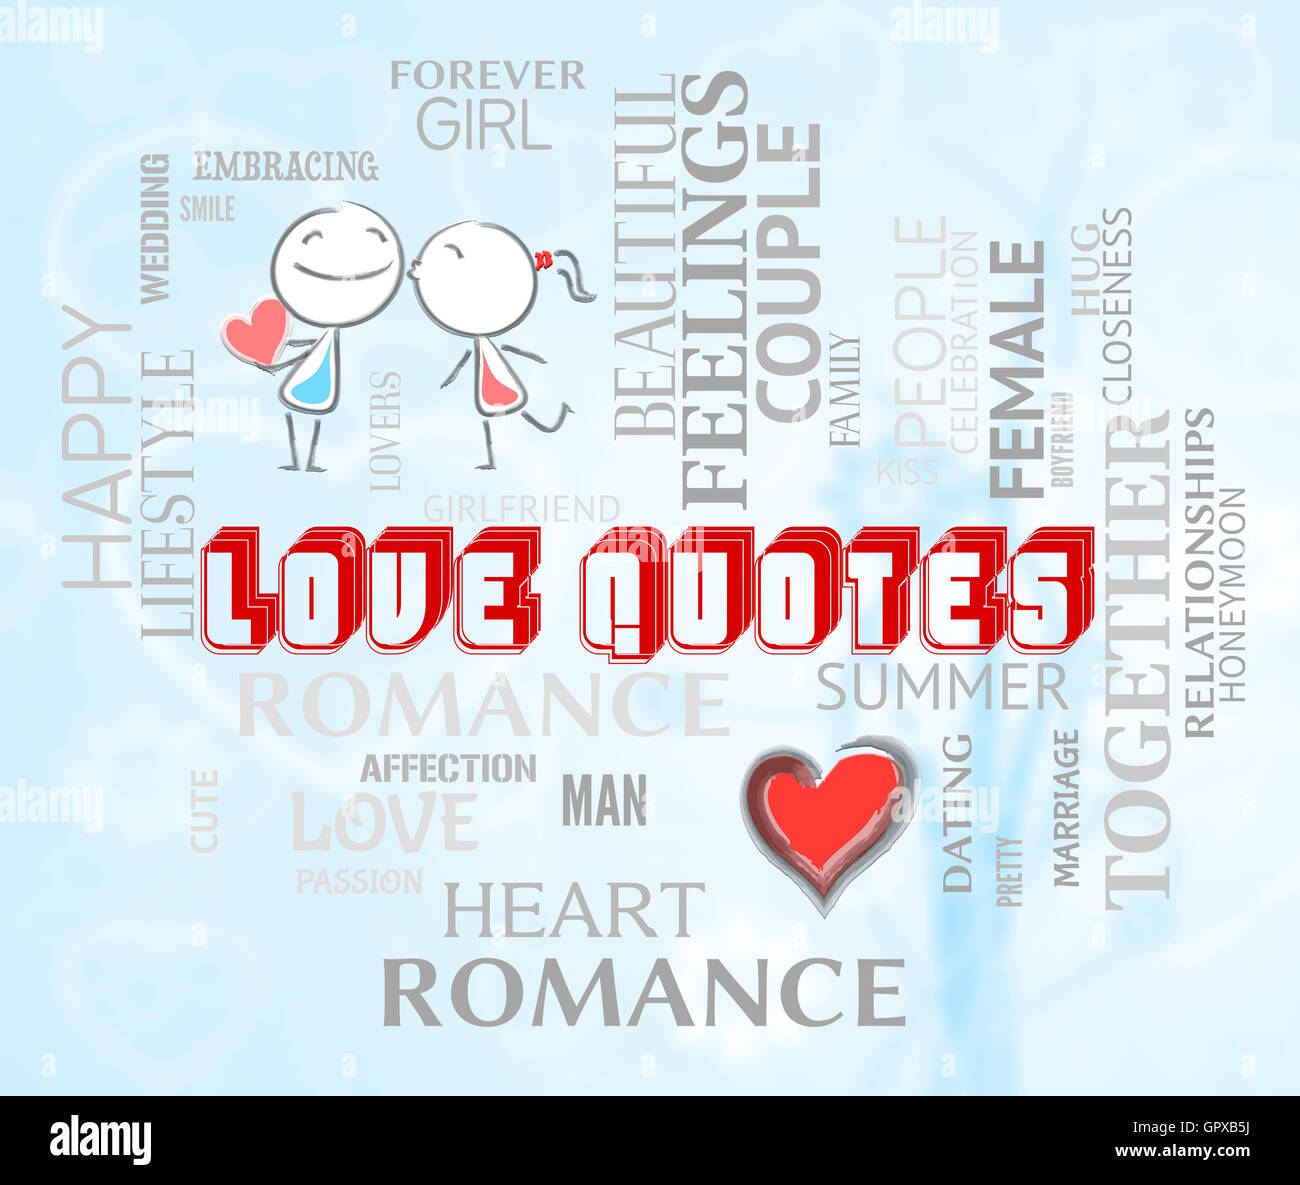 Love Quotes Meaning Fondness Devotion And Inspirational Stock Photo